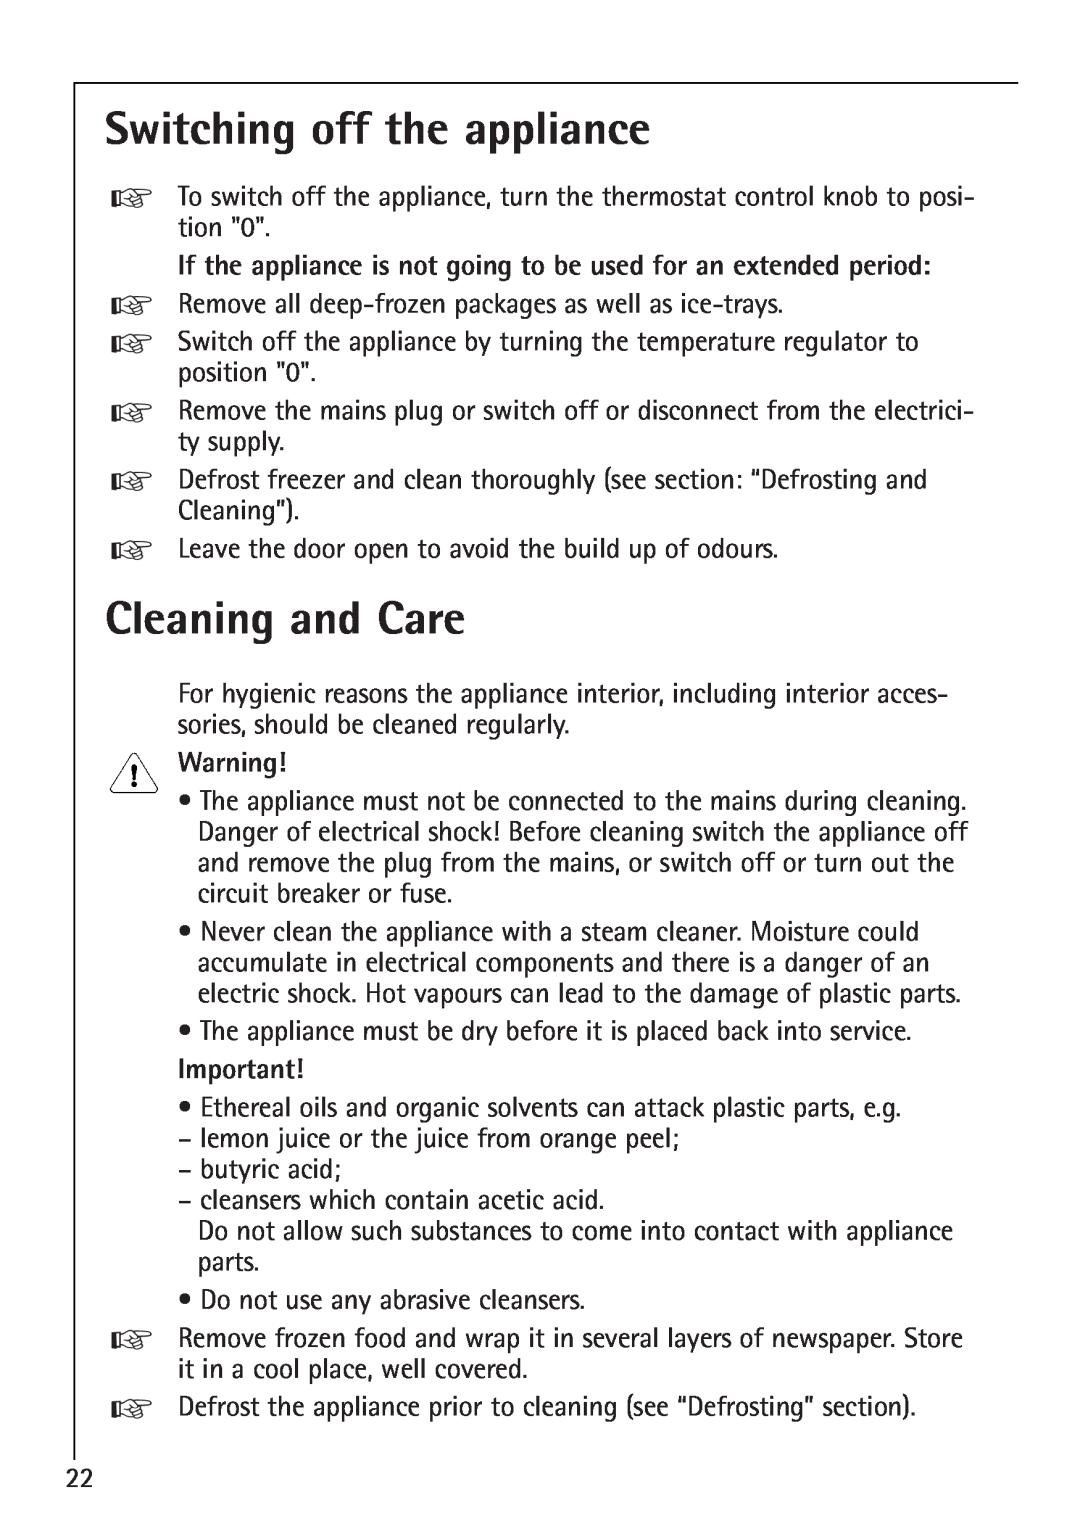 Electrolux 1254-6 iU installation instructions Switching off the appliance, Cleaning and Care 